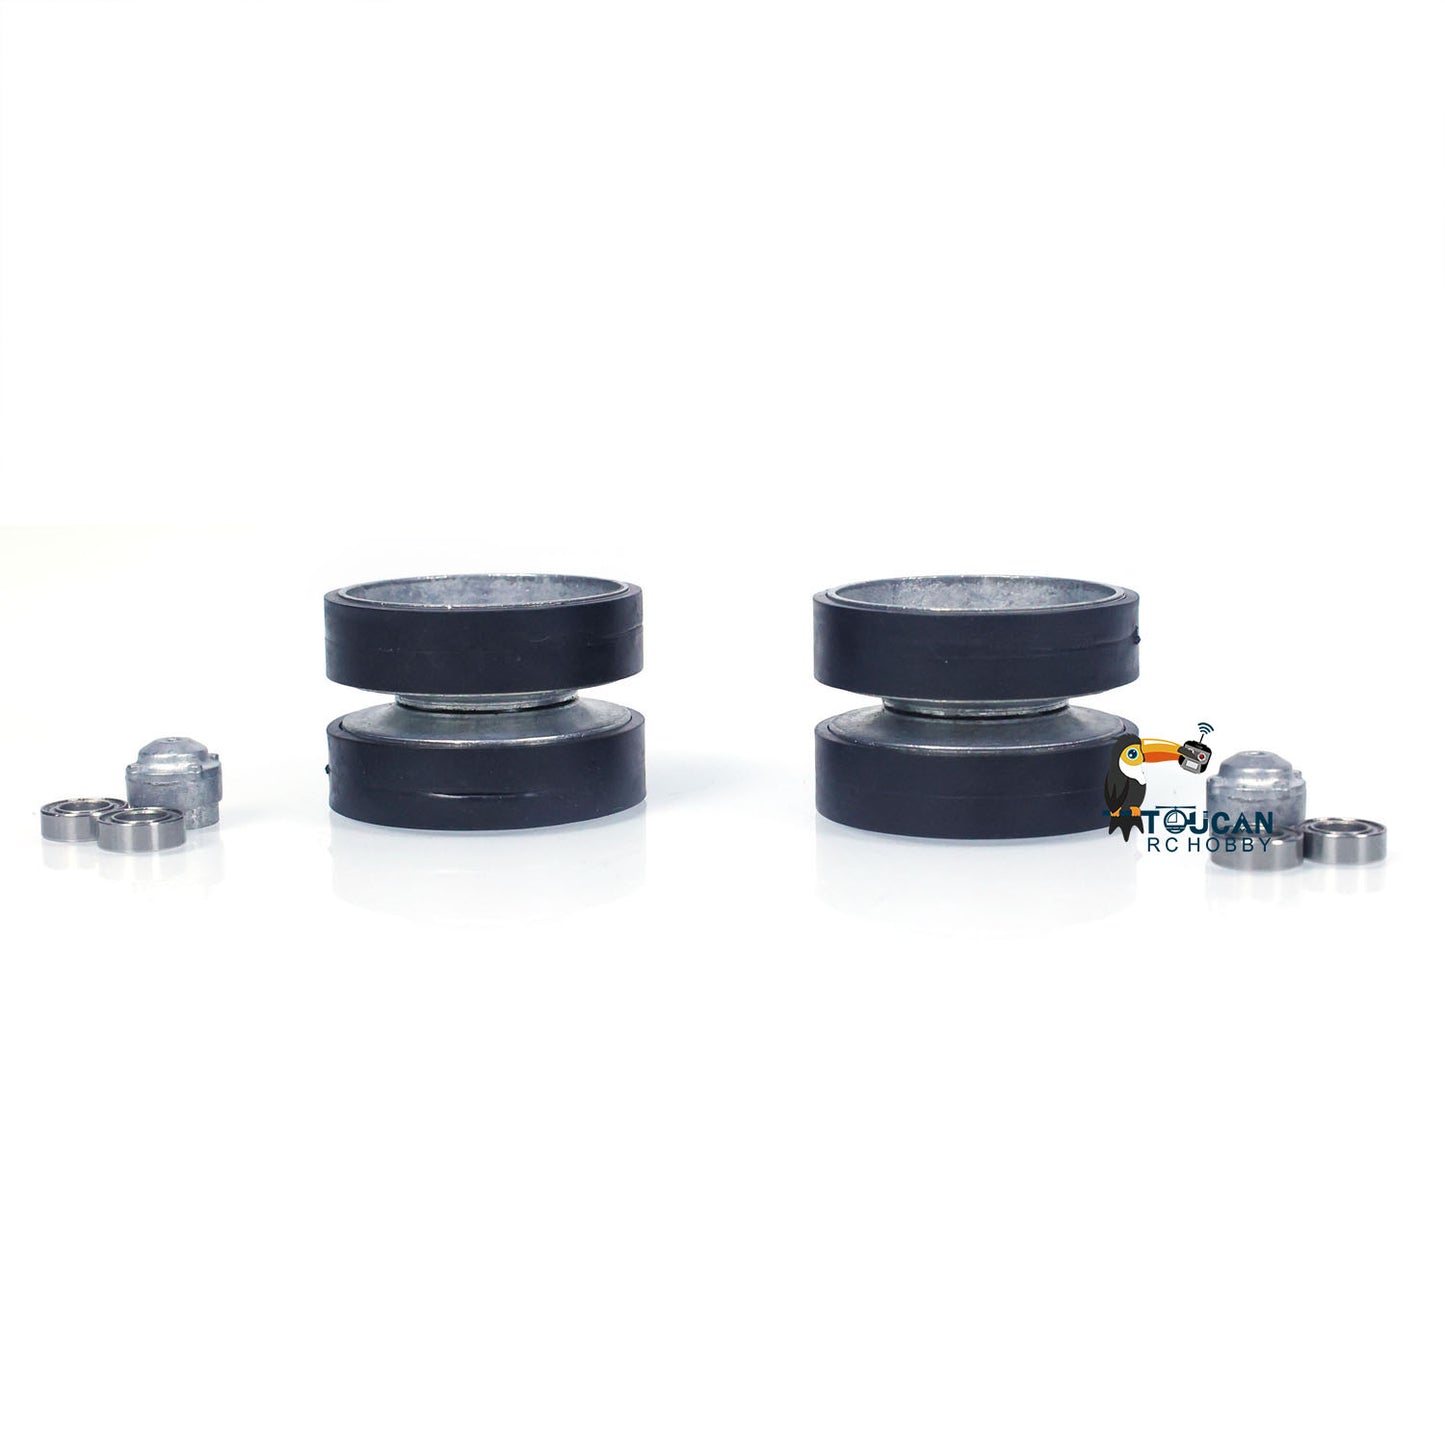 1 Pair Metal Idlers With Tyres Spare Parts for Heng Long 1/16 2.4Ghz RC Battle Tanks German Leopard2A6 3889 Model Replacements